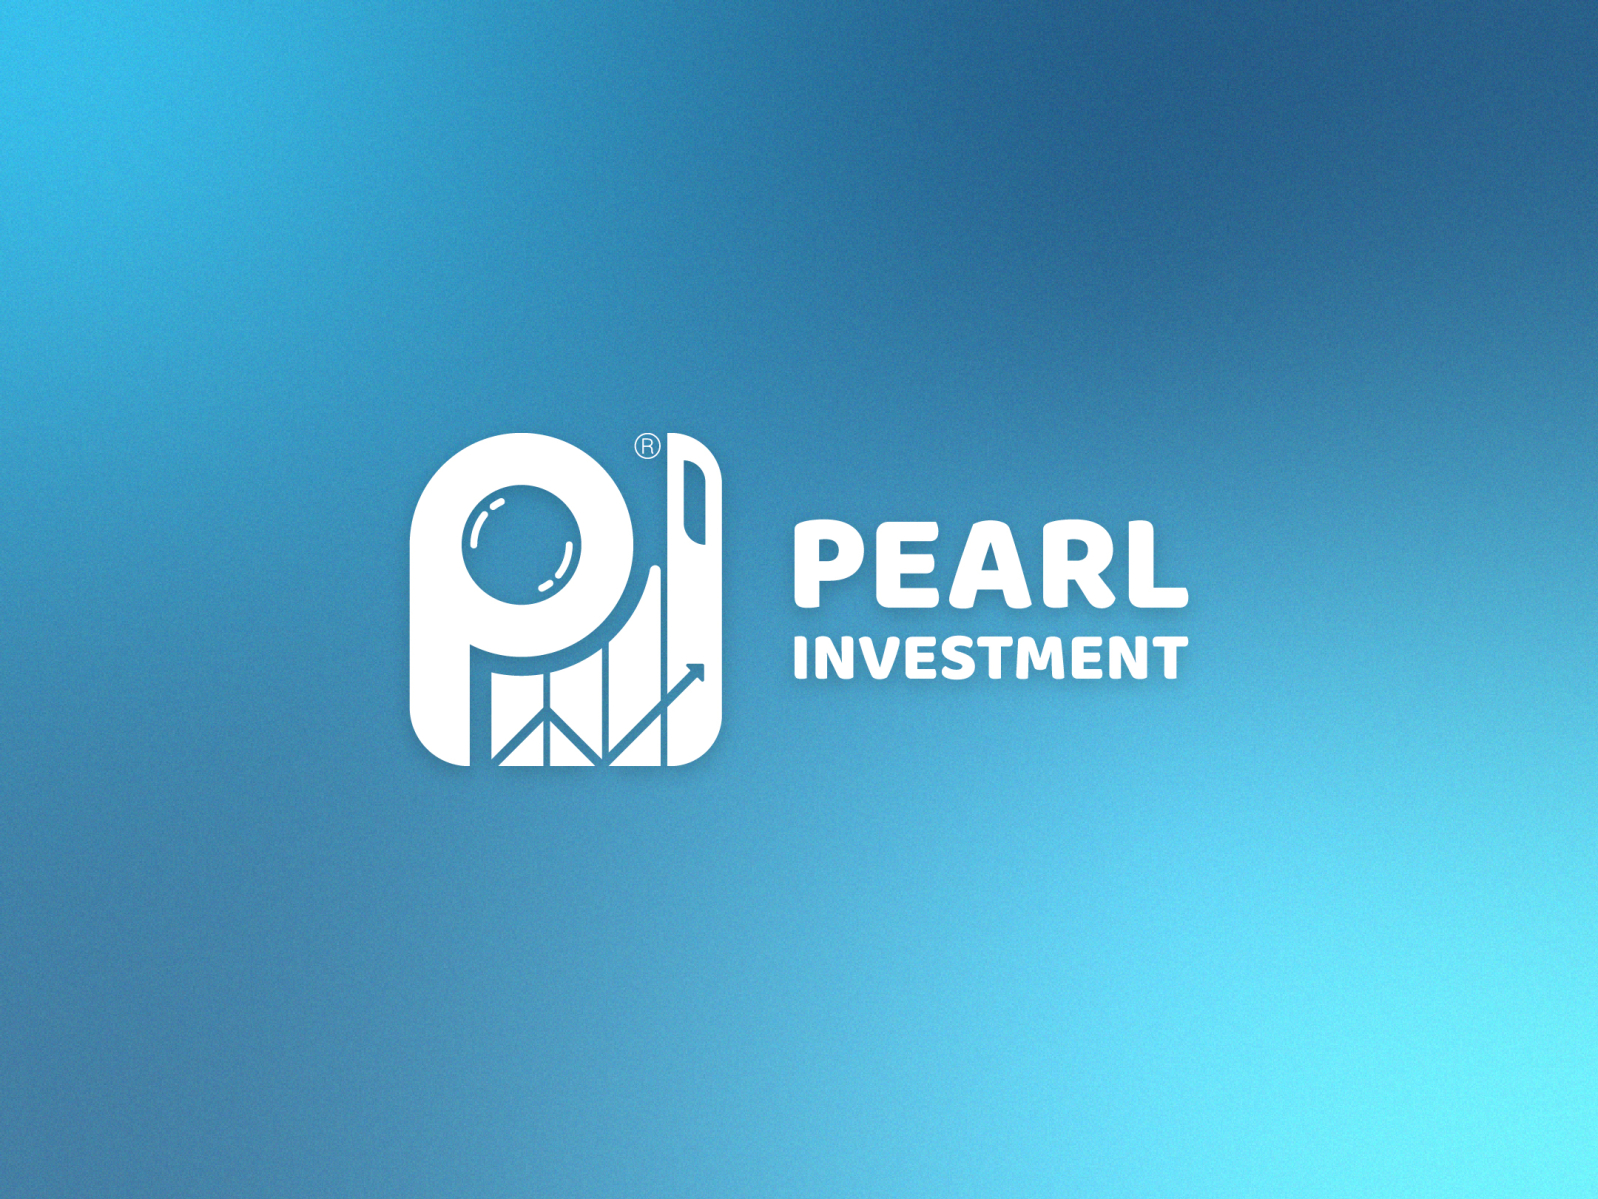 Pearl Investment Logo Design by Akeel Mofeed on Dribbble